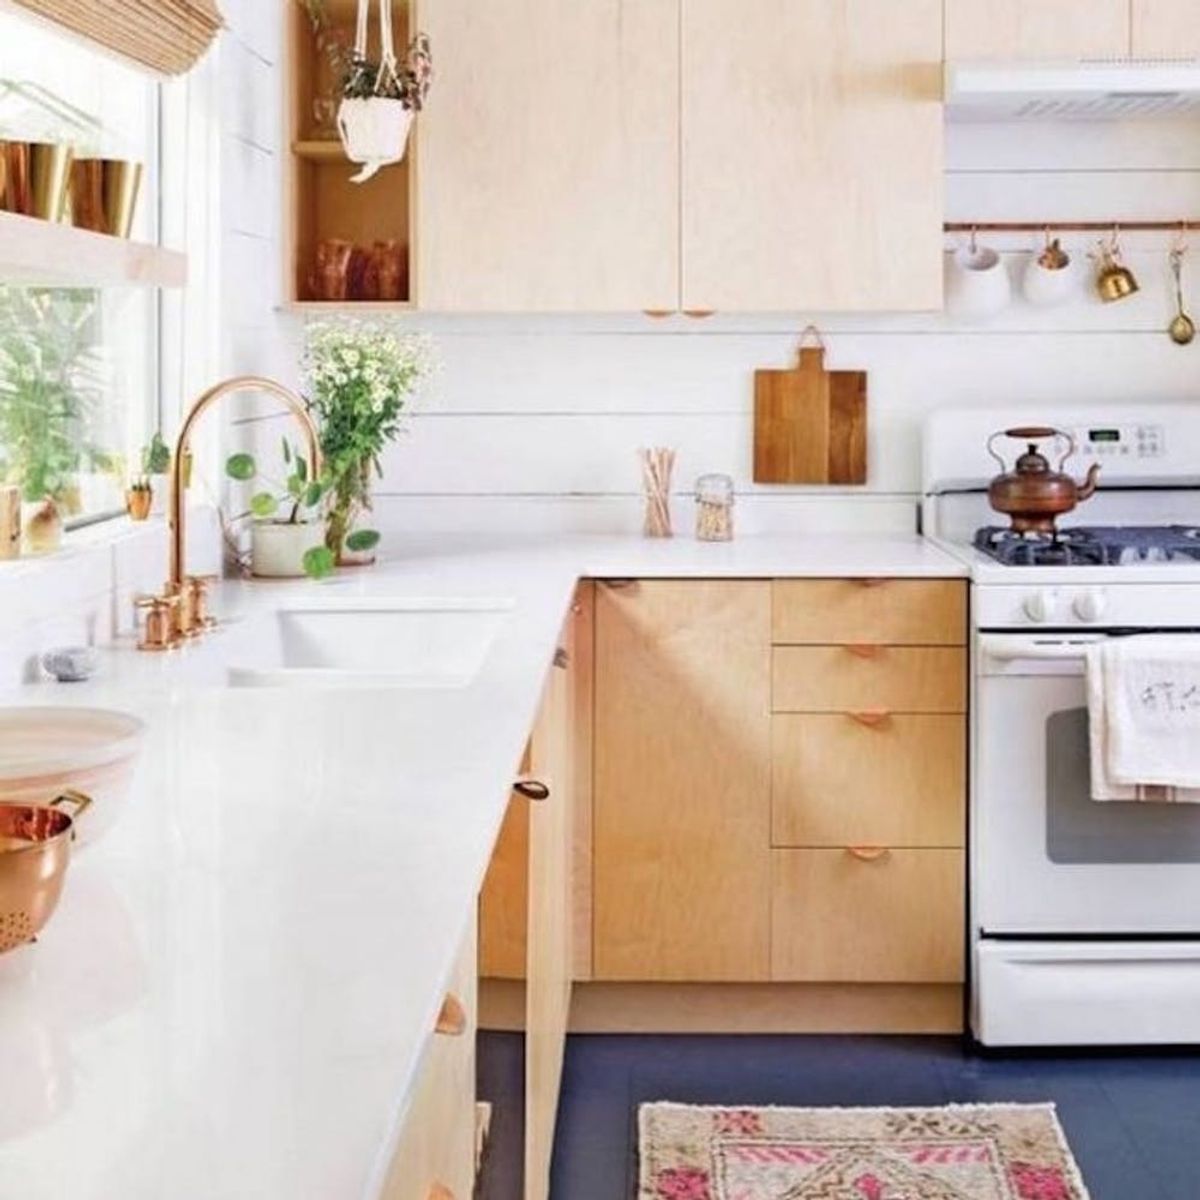 20 Trendy Kitchens That Will Inspire a Season of Hosting